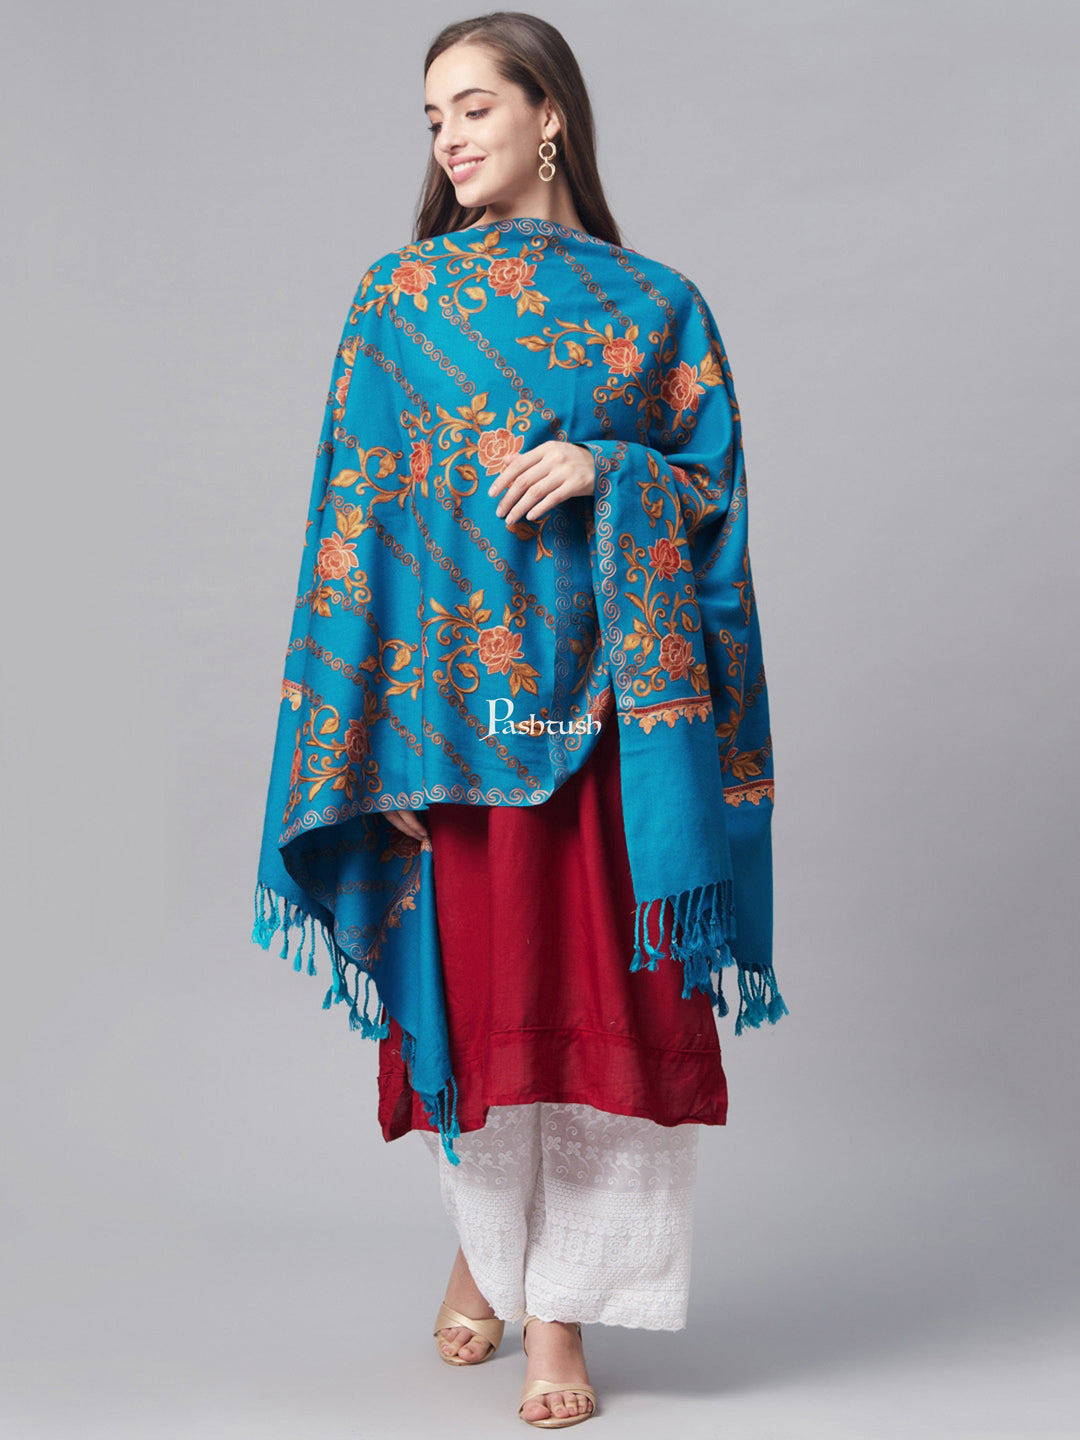 Pashtush India Womens Stoles and Scarves Scarf Pashtush Women Blue Coral Embroidered Designer Stole